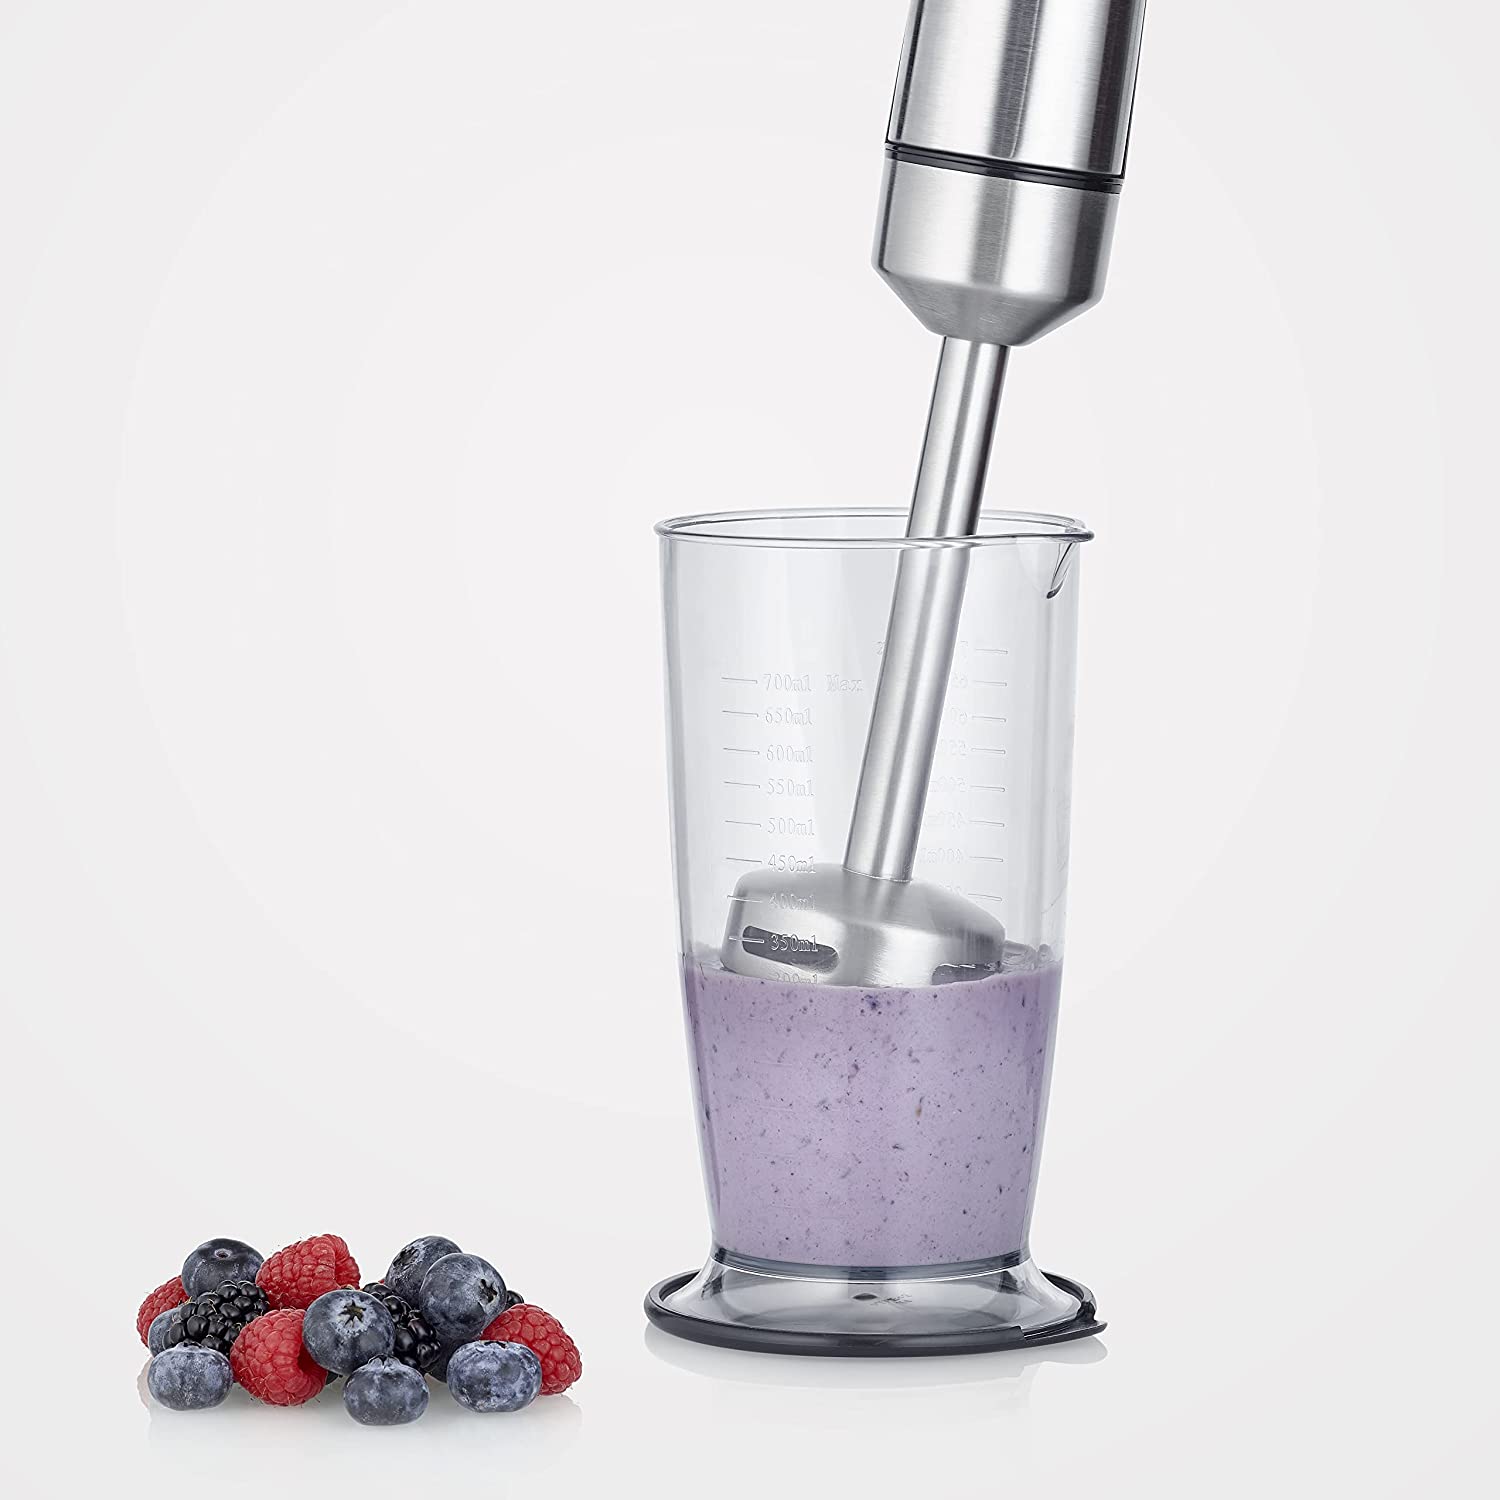 SEVERIN Hand Blender, Powerful Stainless Steel Mixing Rod with 4-Blade Stainless Steel Blade and Mixing Container Included, 1,000 W, SM 3773